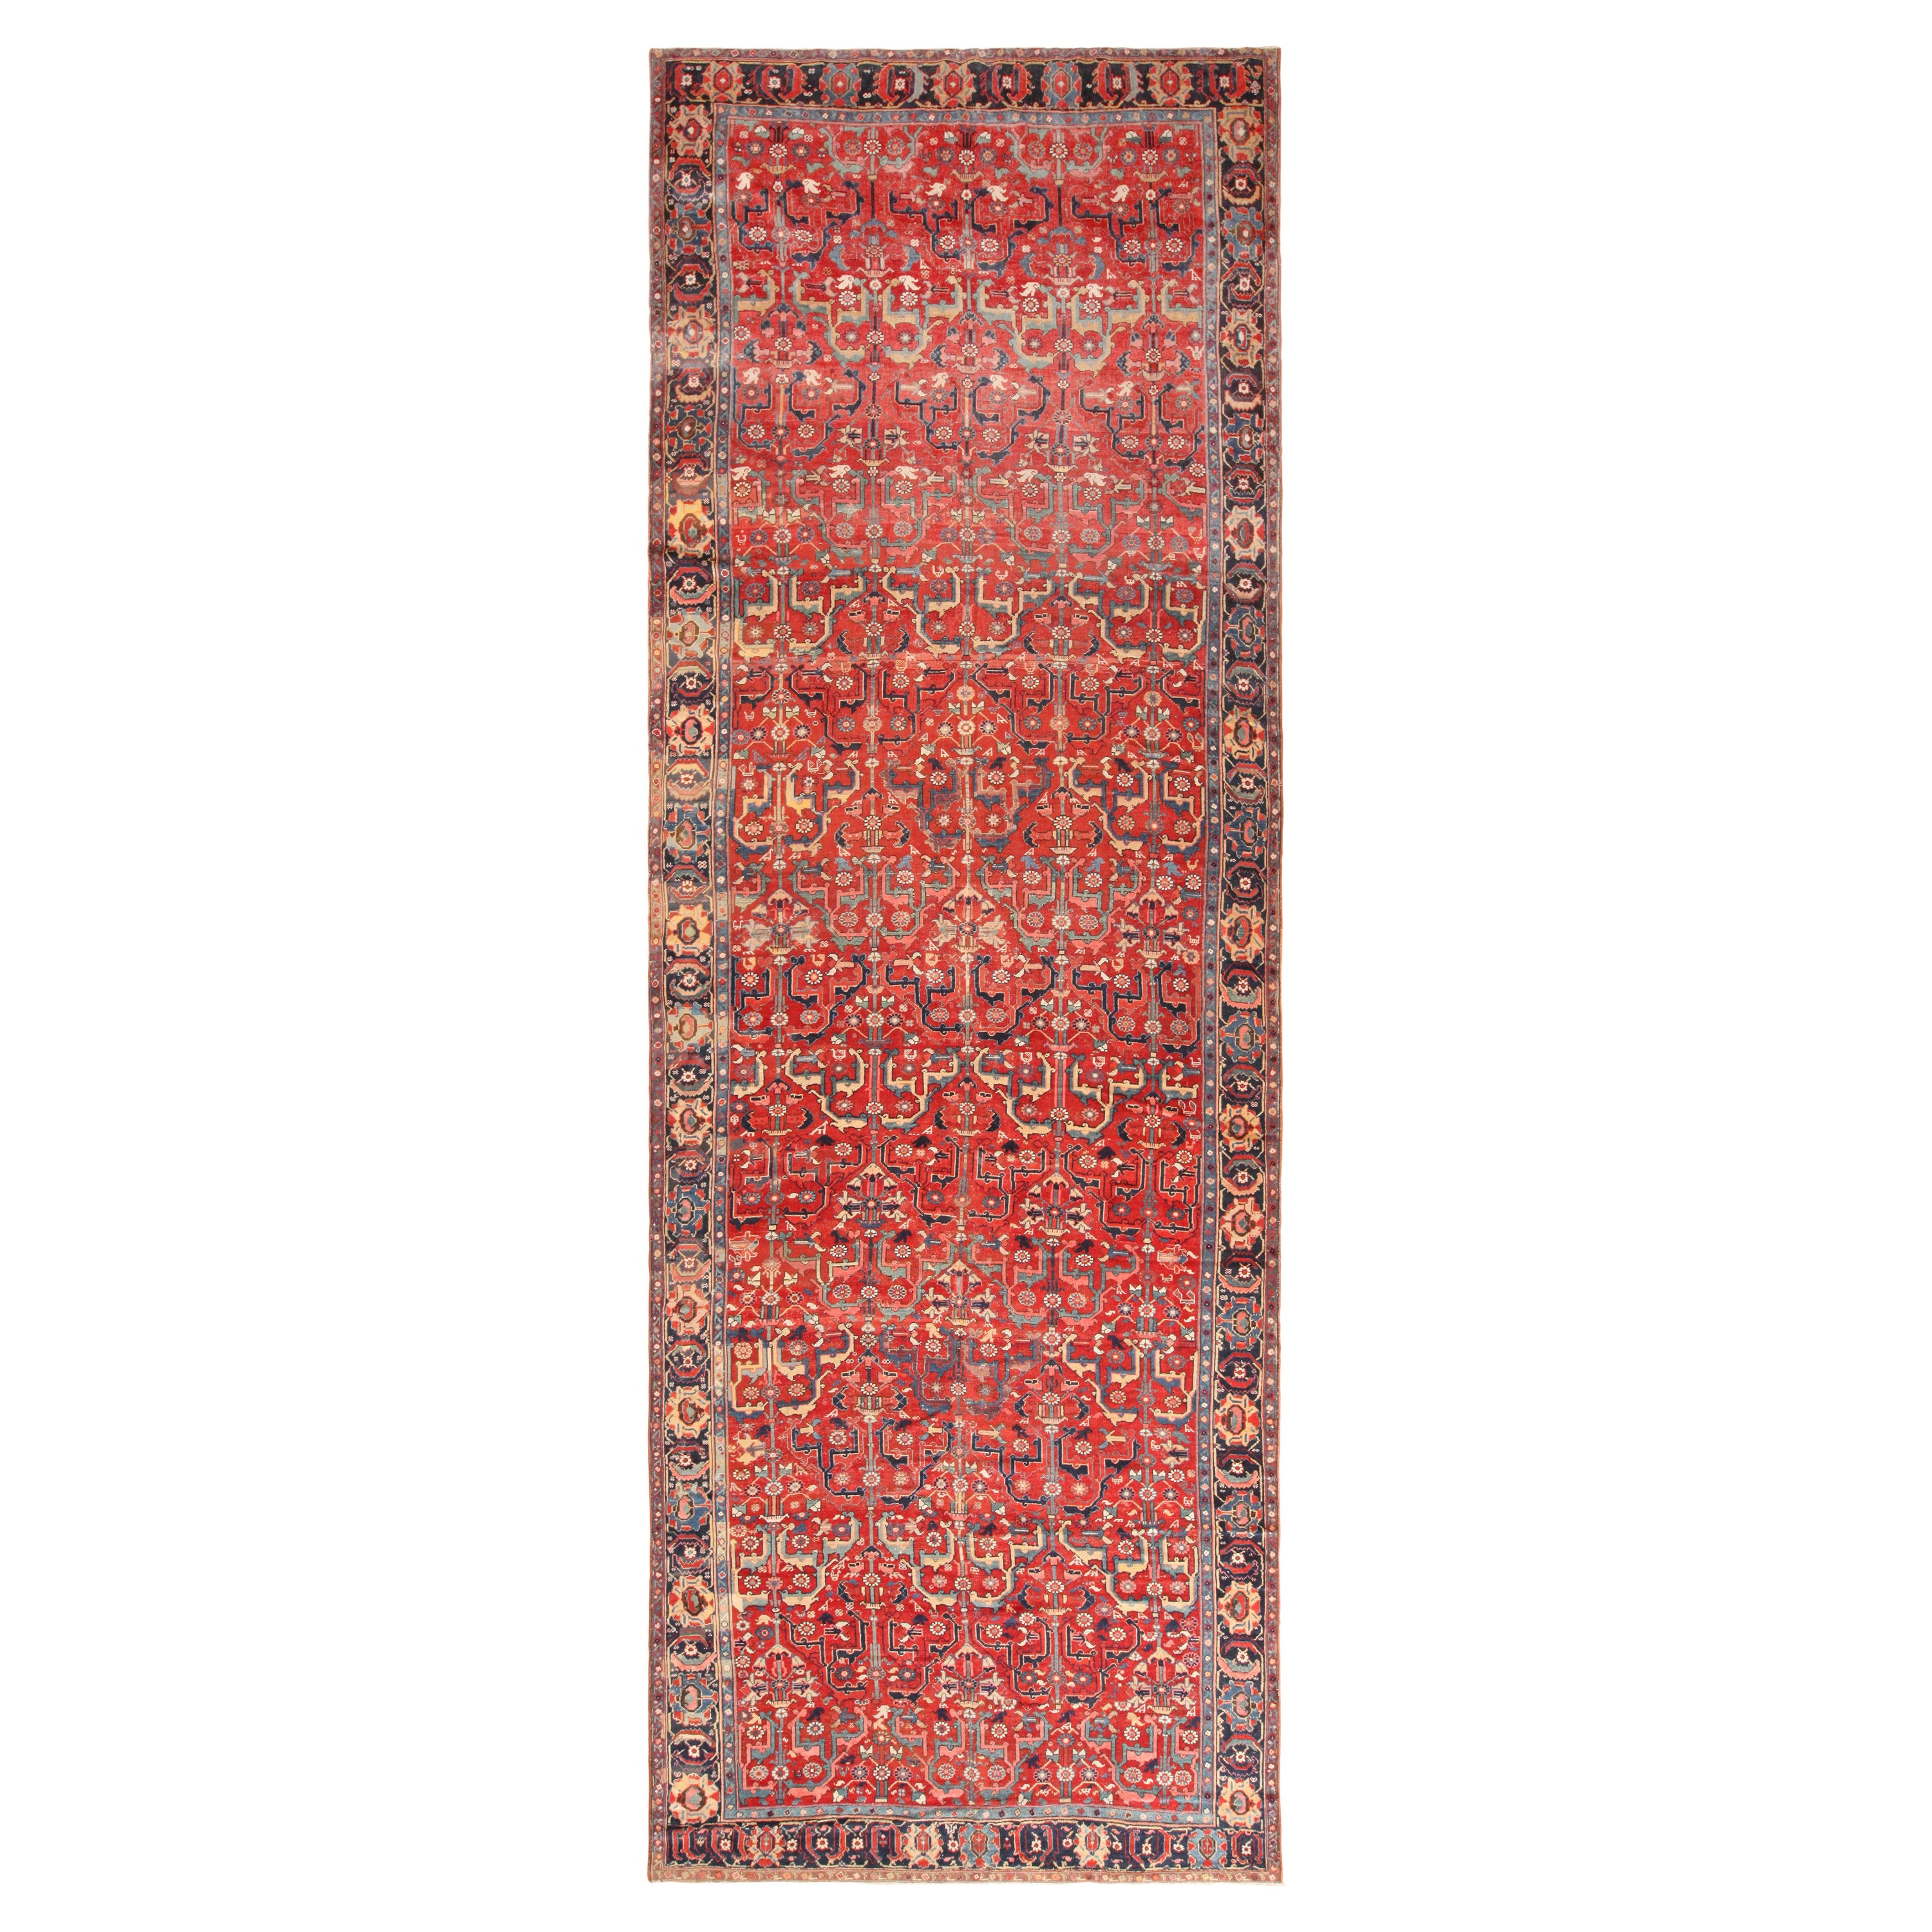 Breathtaking Antique North West Persian Wide Hallway Gallery Rug 6'9" x 19'6" For Sale